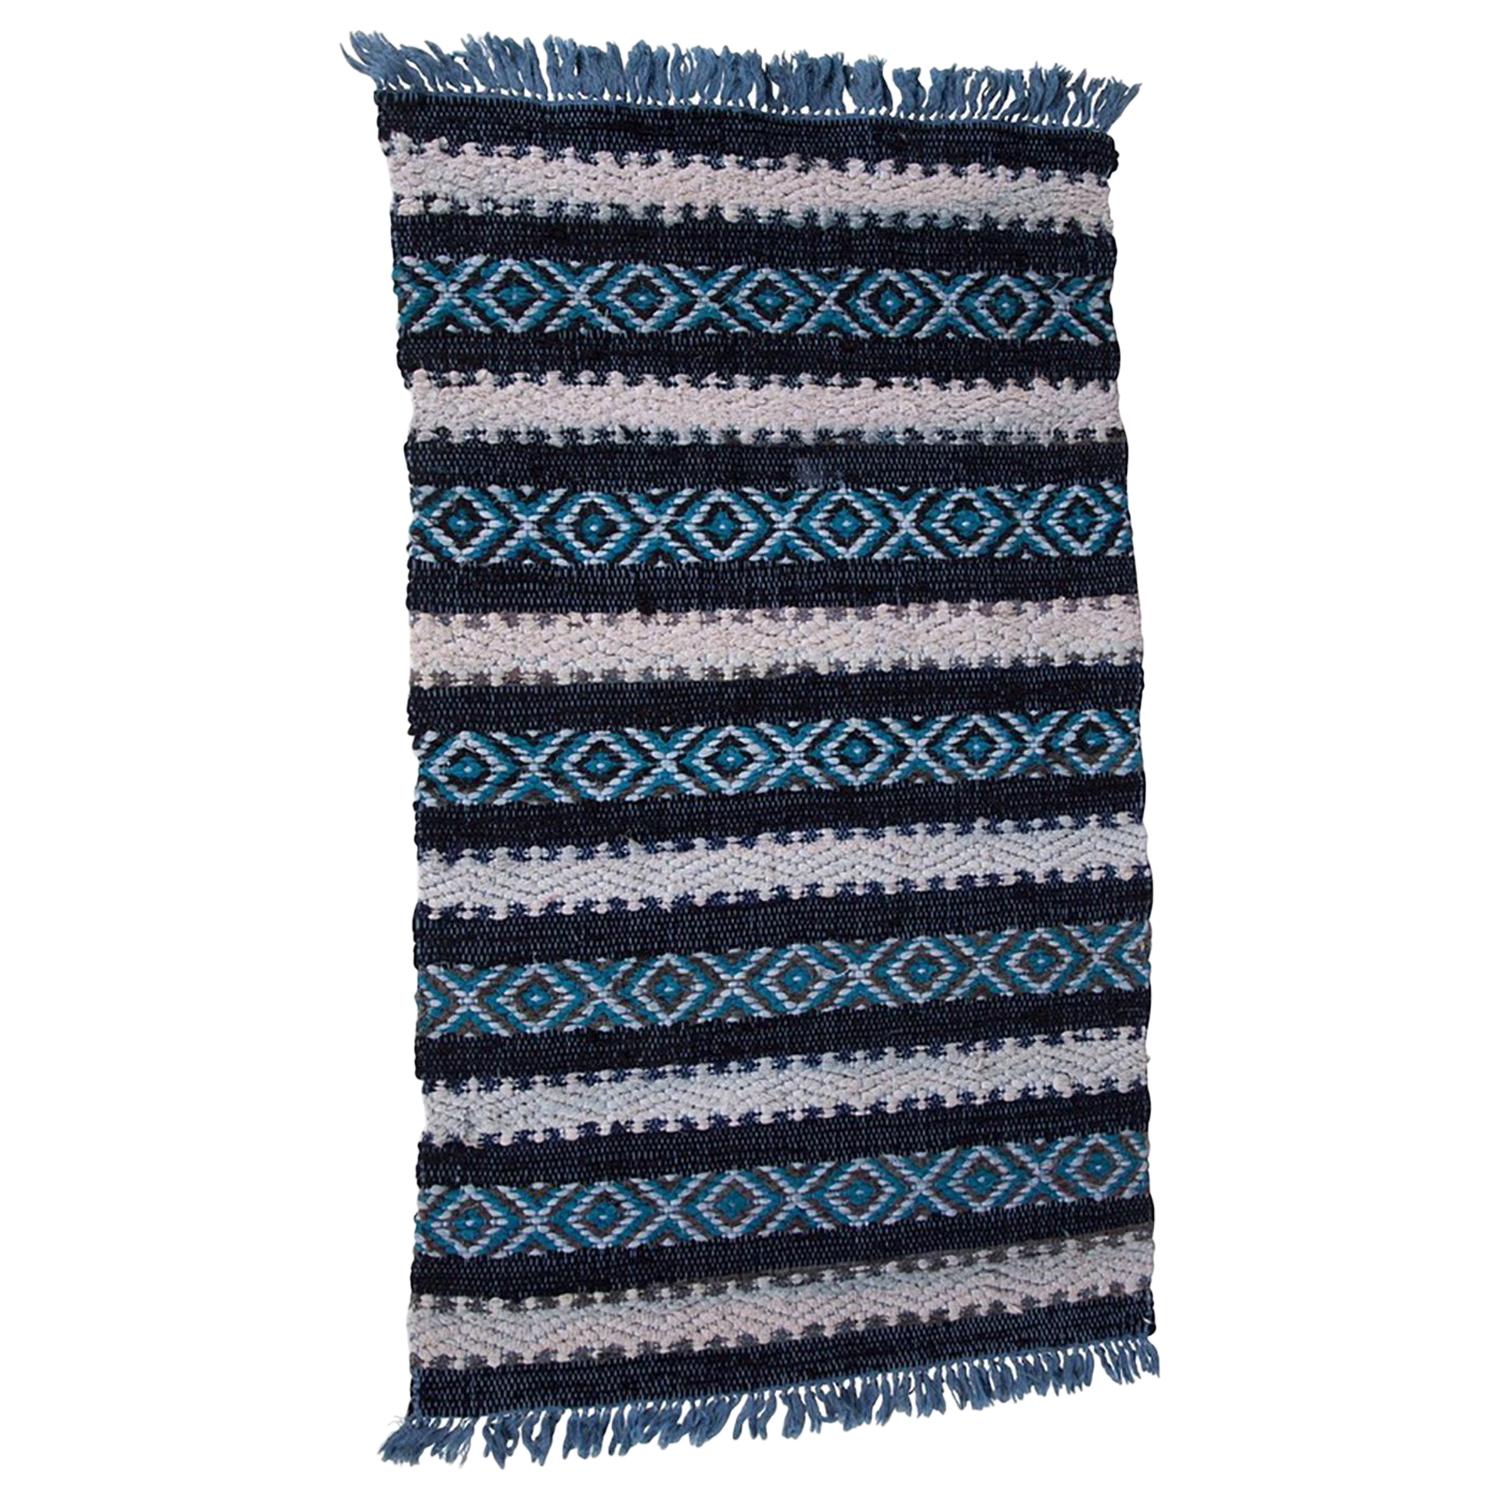 20th Century Diamond Patterned Blue White and Black Swedish Handwoven Cotton Rug